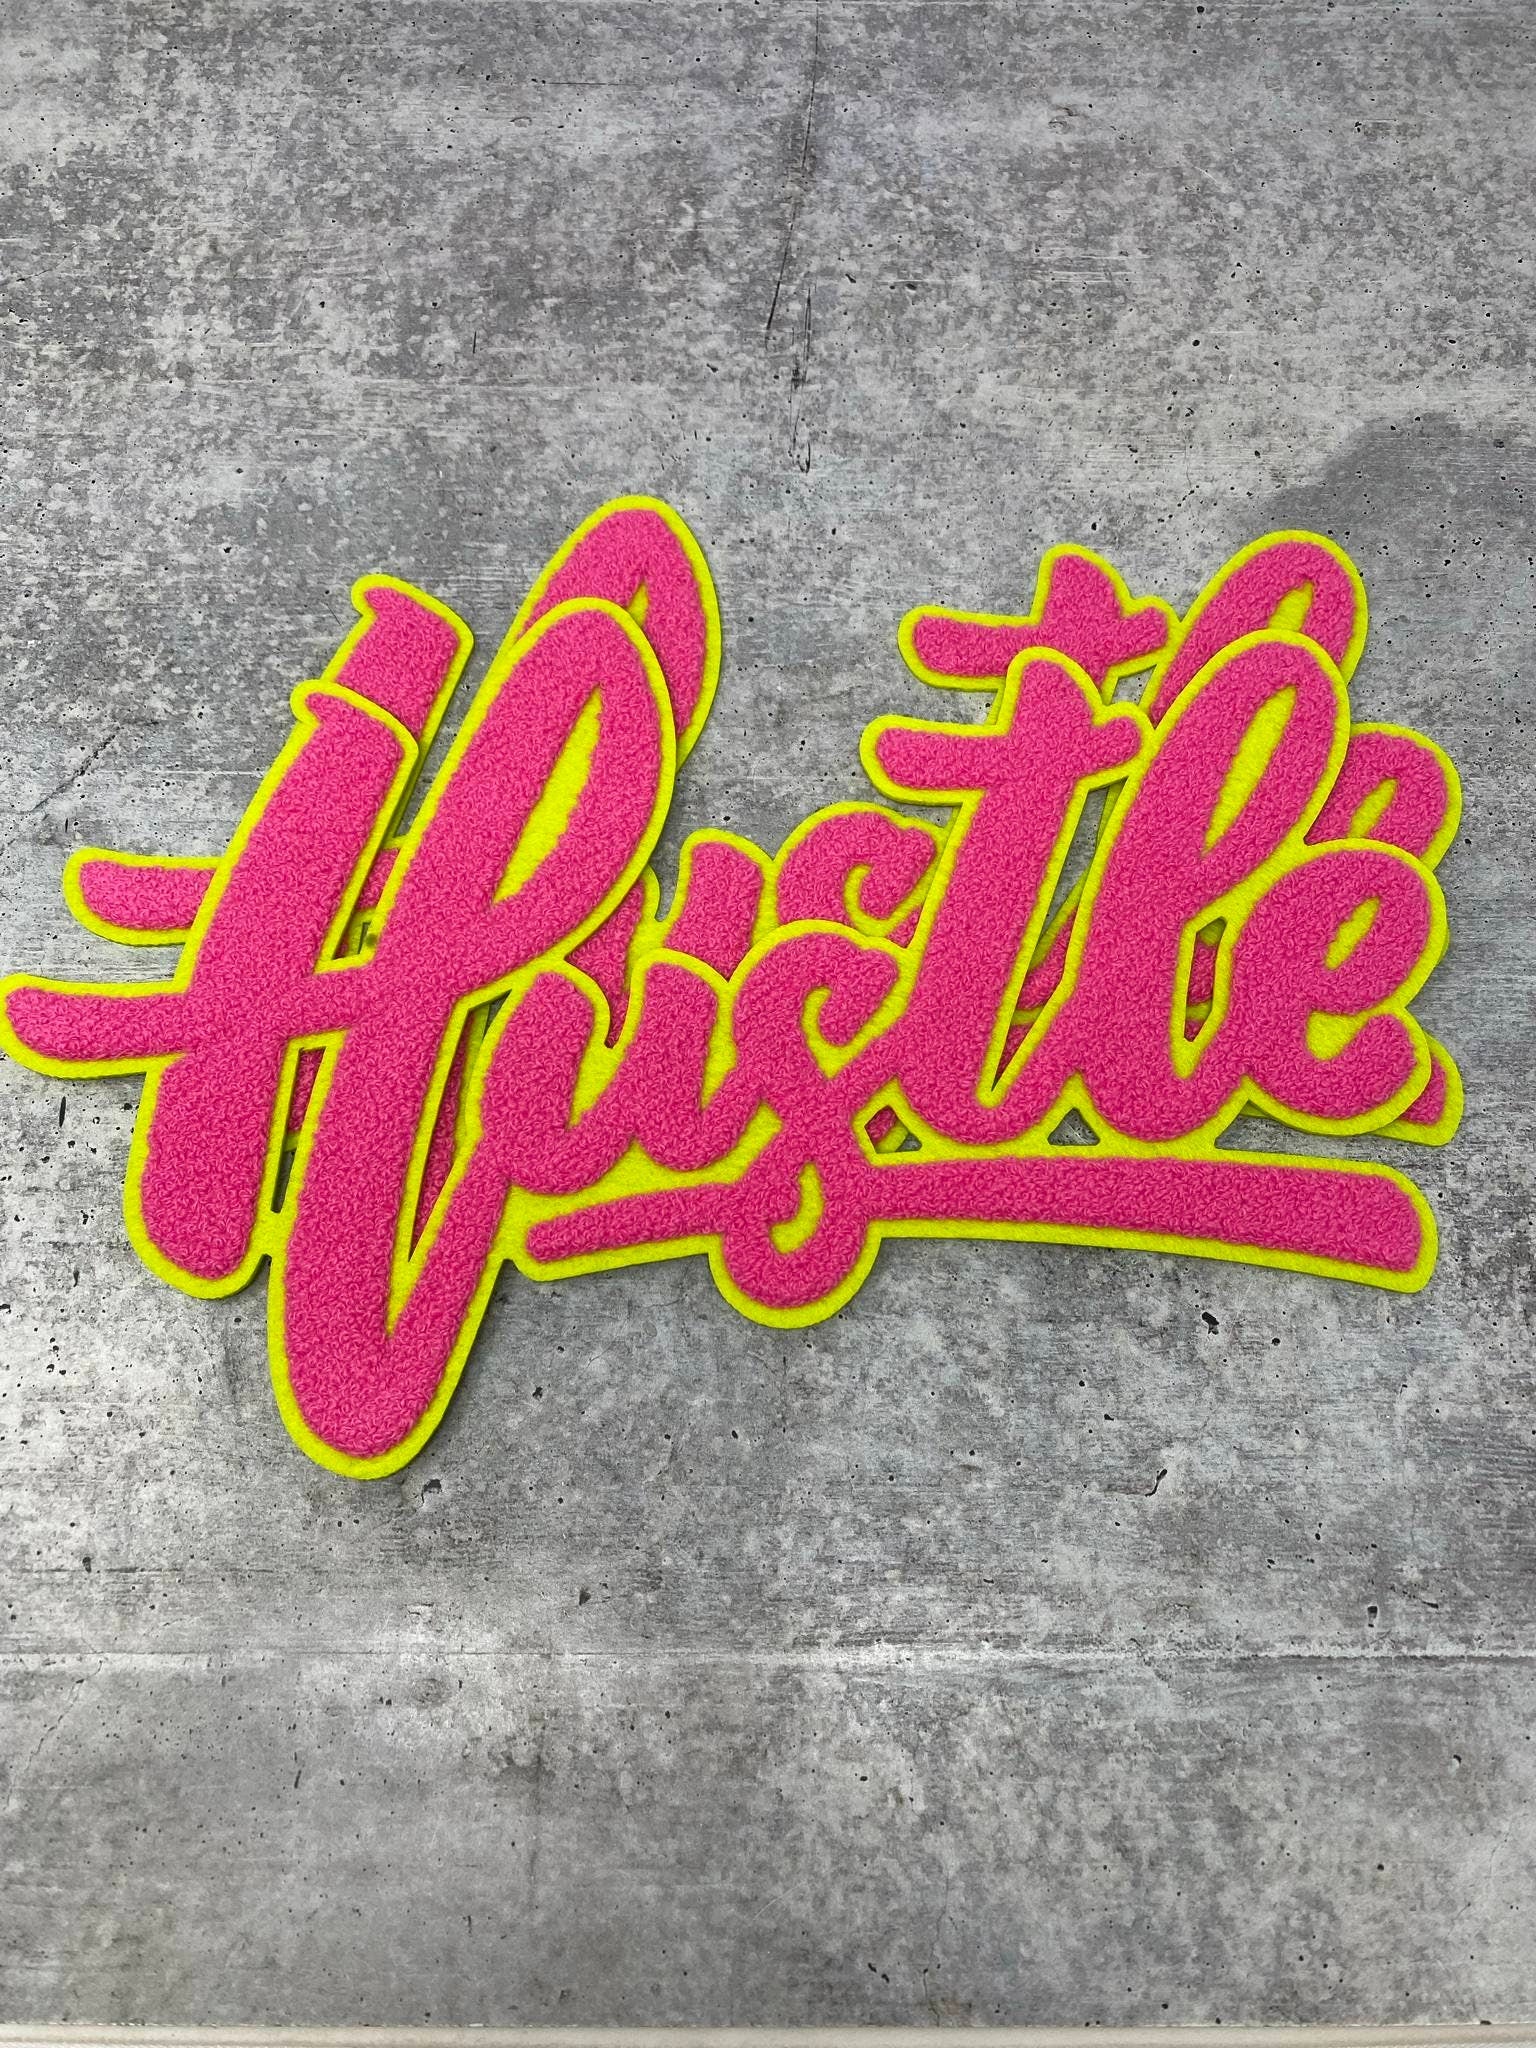 Exclusive, 1-pc, Pink & Green "Hustle" Chenille Patch (iron-on) Size 10"x8", Varsity Patch for Denim Jacket, Shirts and Hoodies, Large Patch